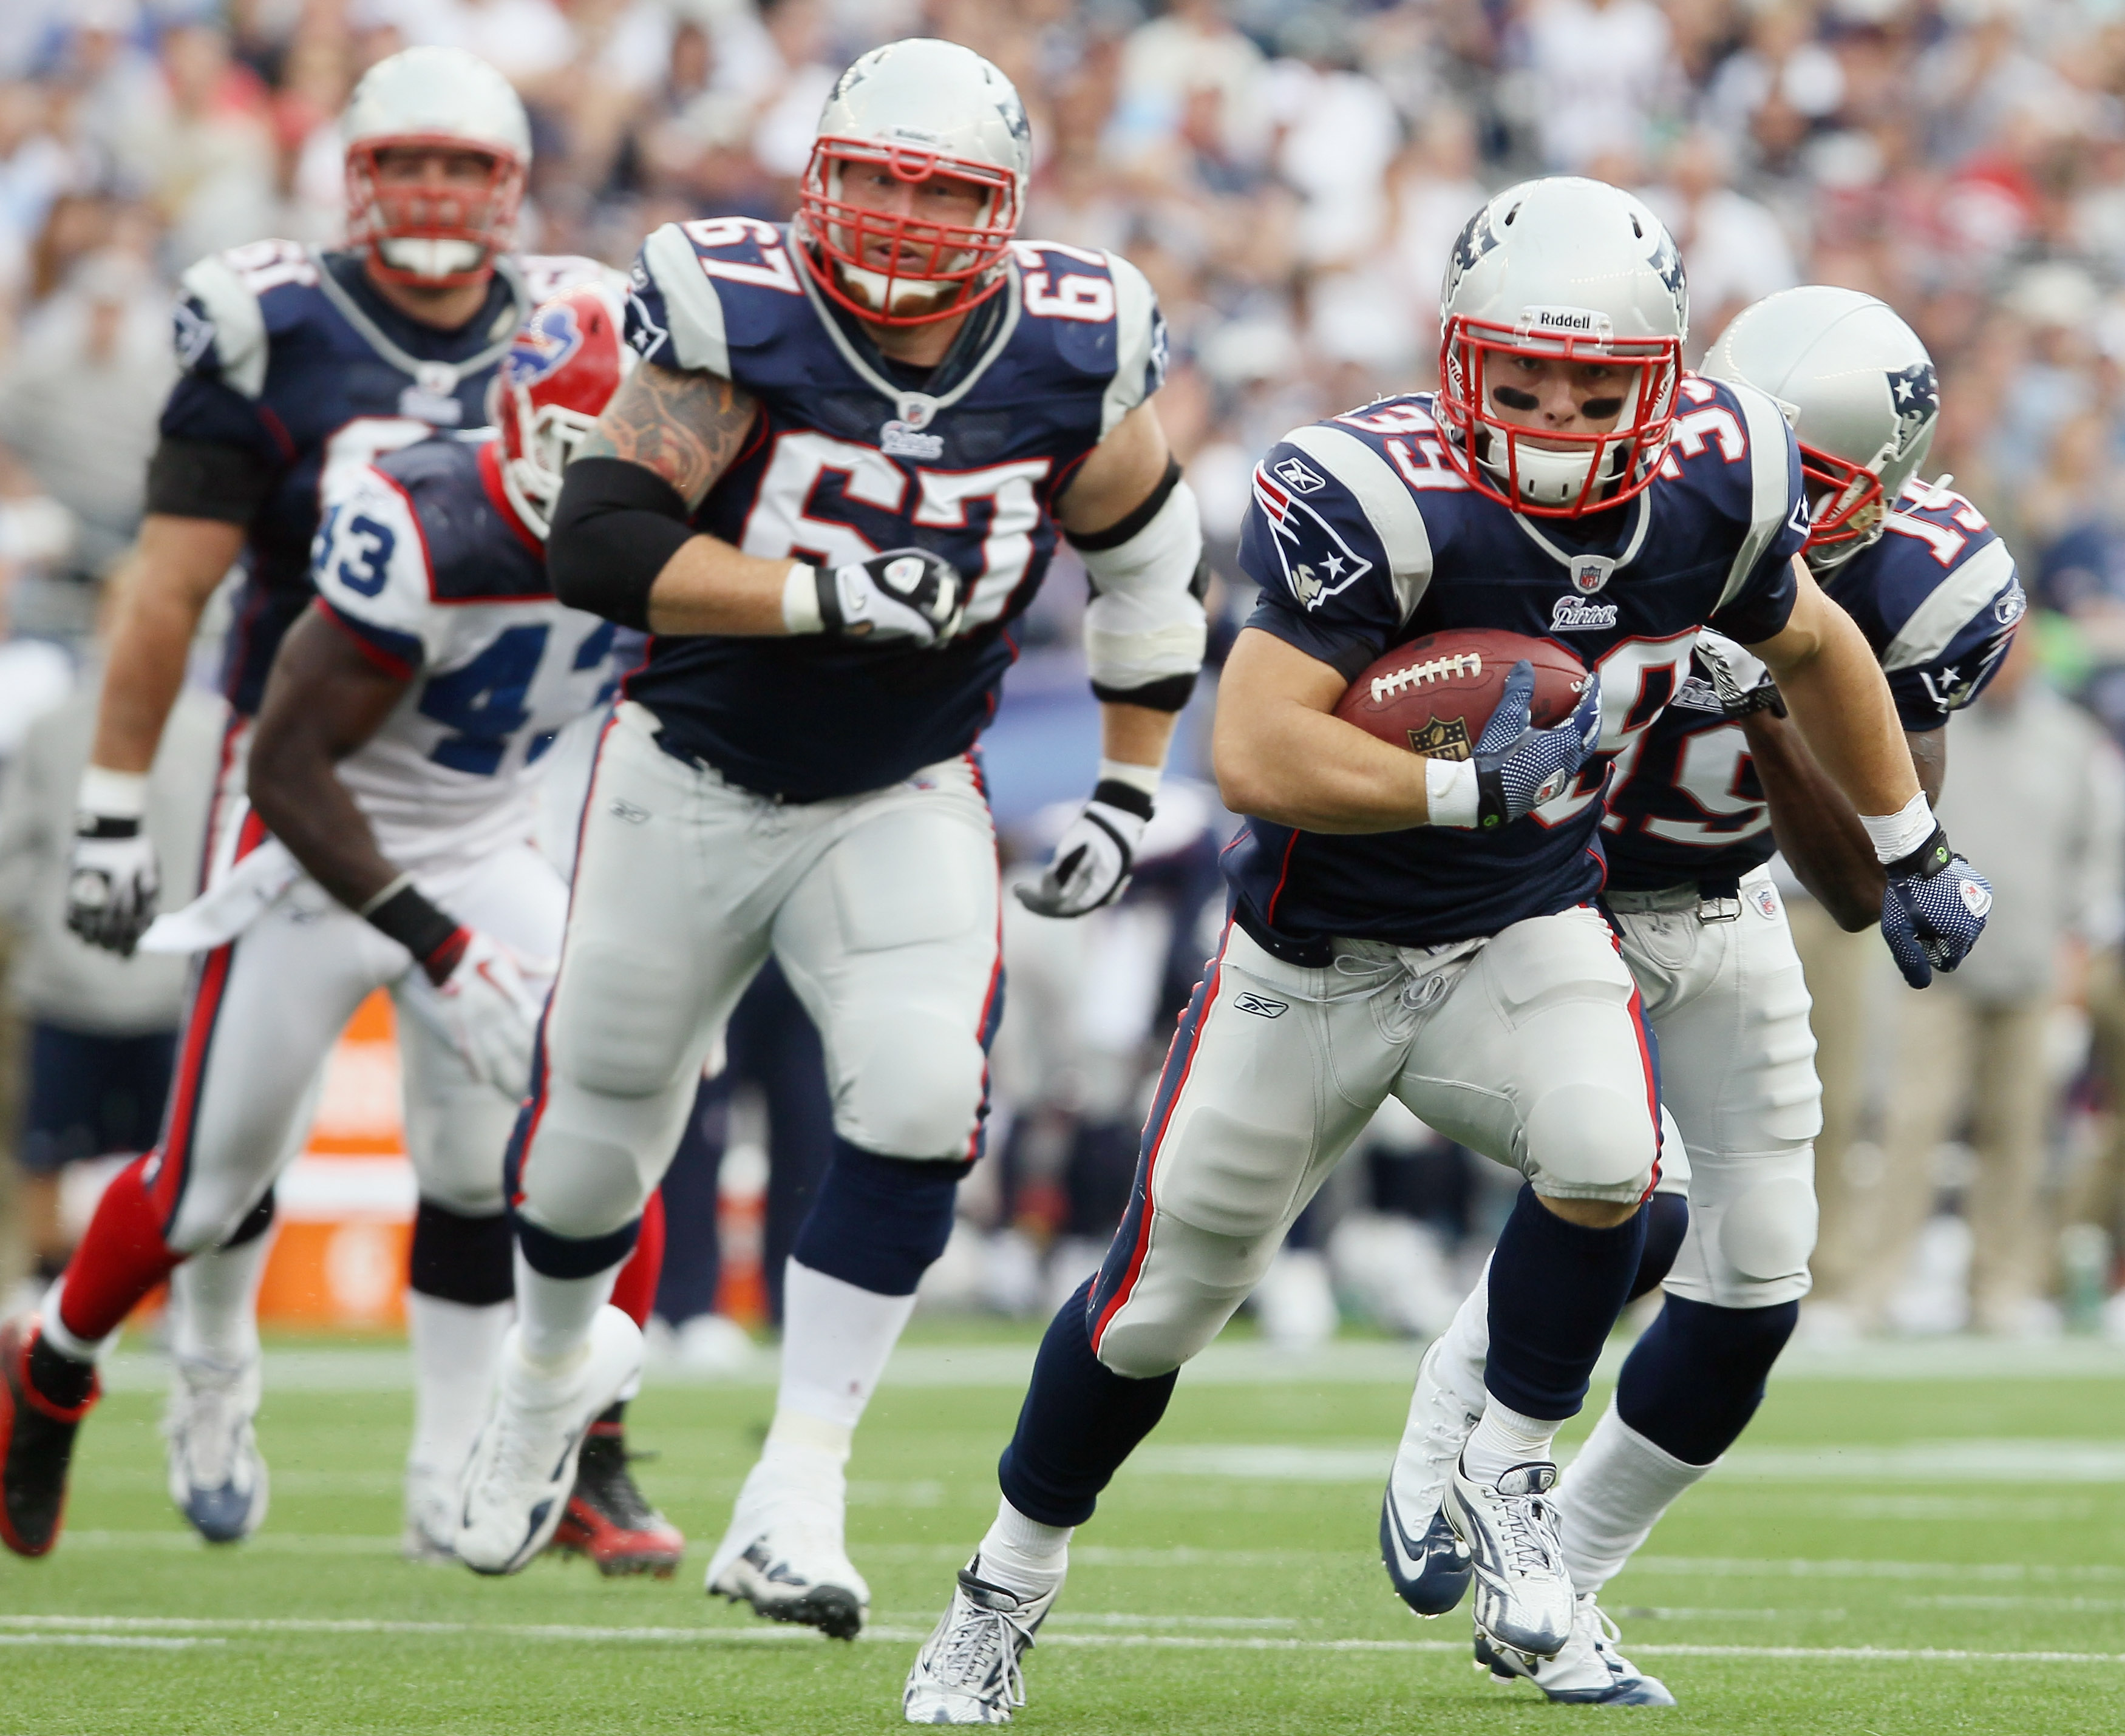 FOXBORO, MA - SEPTEMBER 26:  Danny Woodhead #39 of the New England Patriots carries the ball in for a touchdown as teammate Dan Koppen #67 follows in the second quarter against the Buffalo Bills during on September 26, 2010 at Gillette Stadium in Foxboro,